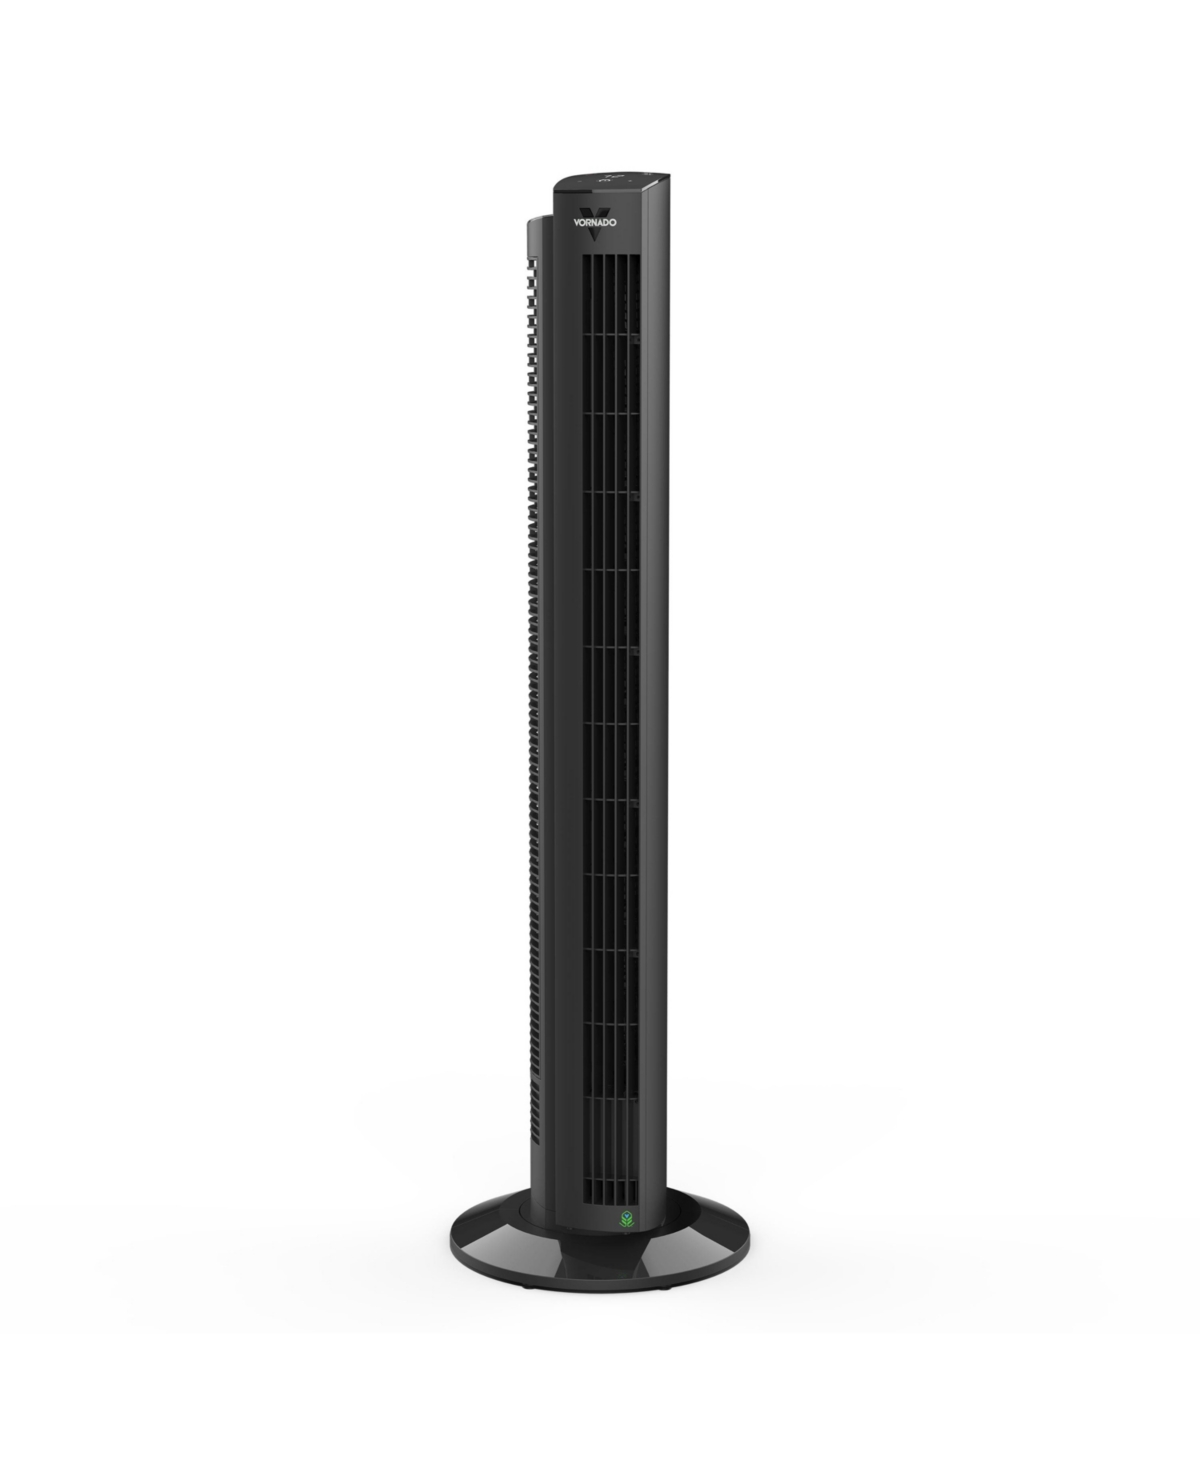 Shop Vornado Ozi42dc Tower Fan With Remote And Timer, Oscillating Standing Fan For Bedroom, Variable Speed For Pr In Black